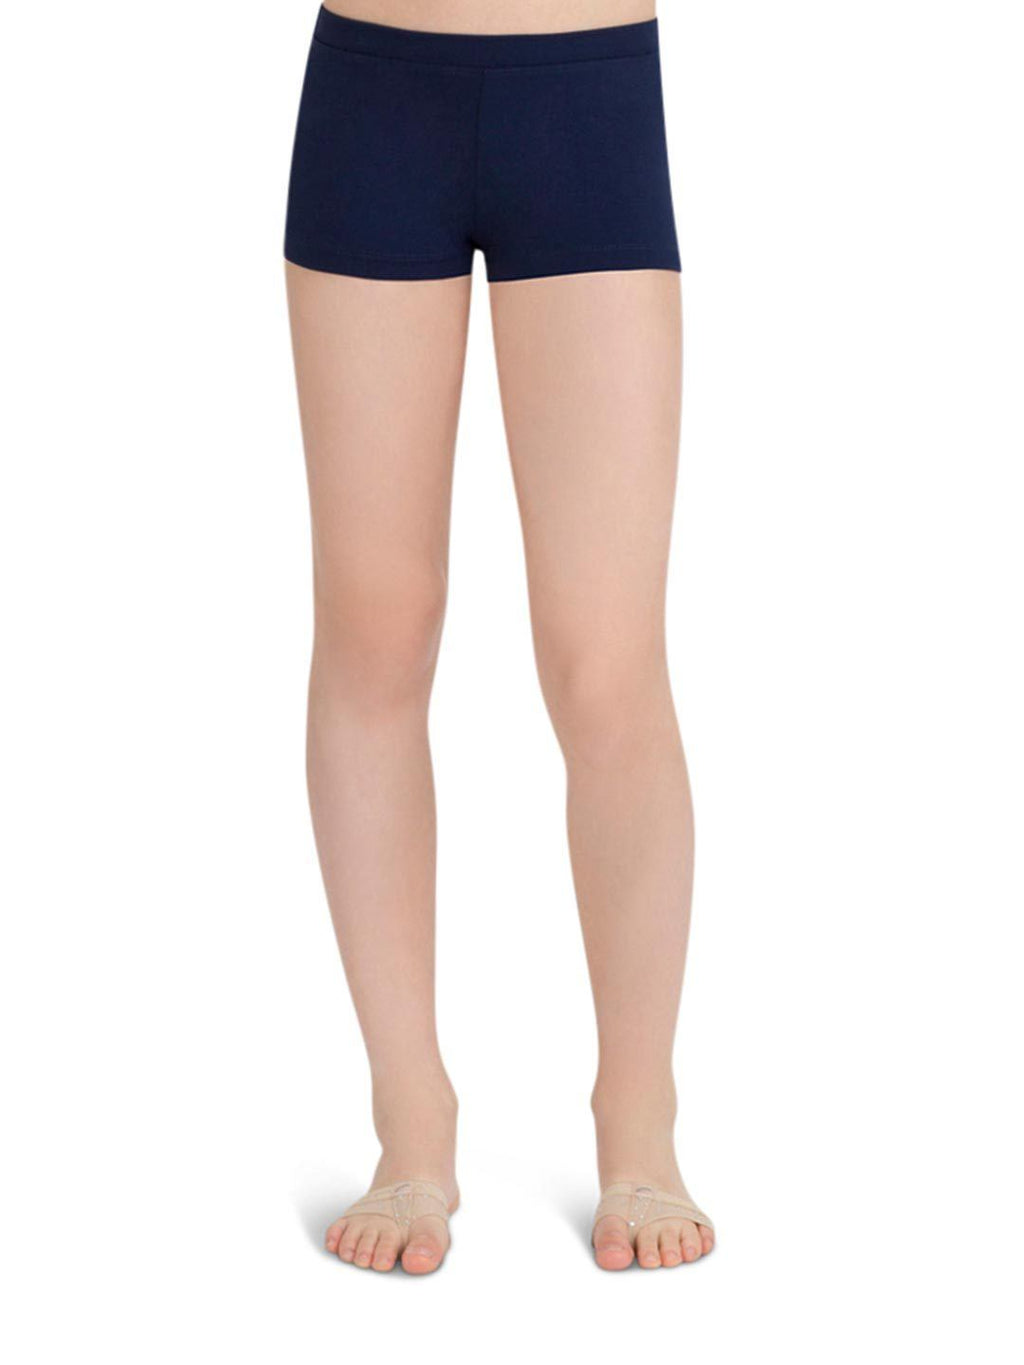 CAPEZIO Ribbed Seamless Shortie Panties - 3-Pack, Boy Shorts - Save 50%